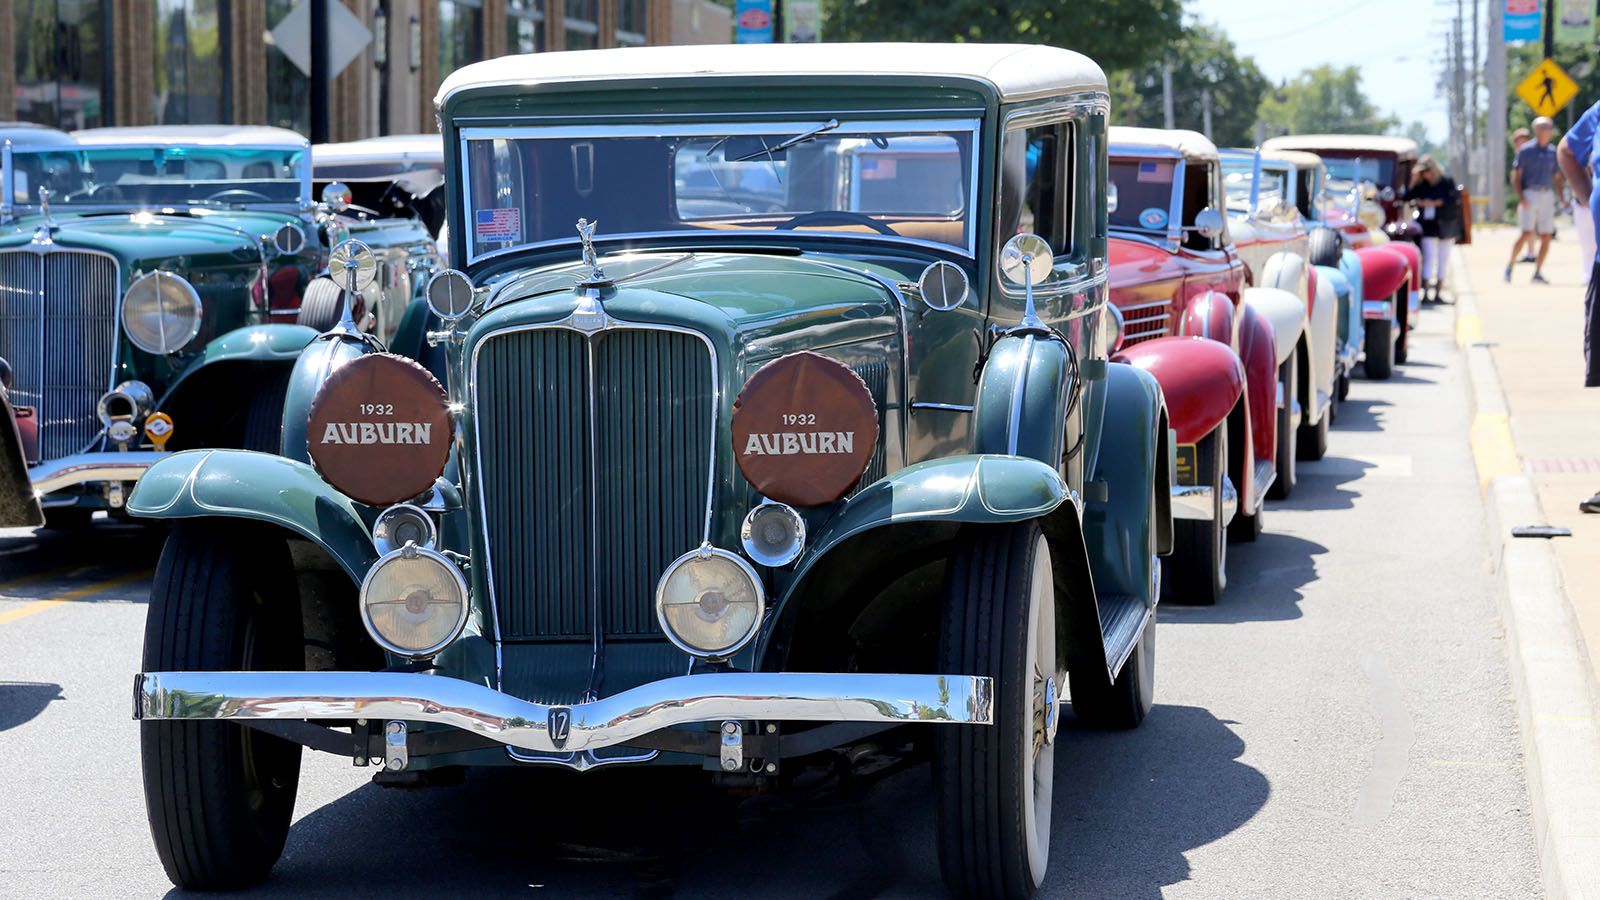 If you’re a fan of cars, the annual Auburn Cord Duesenberg Festival is where you will want to be over Labor Day Weekend.